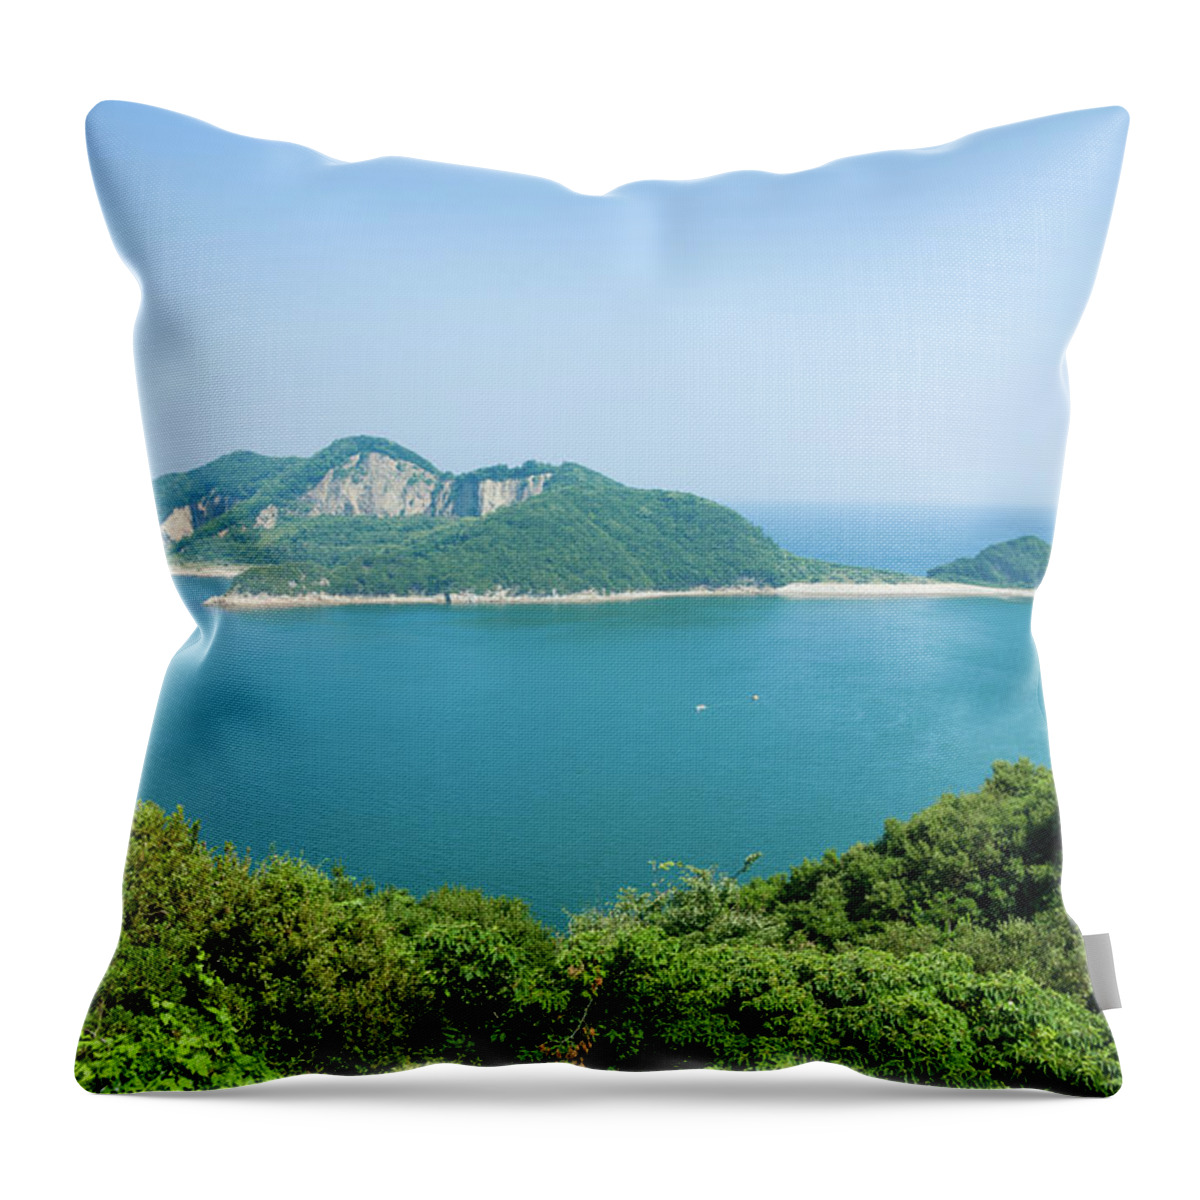 Scenics Throw Pillow featuring the photograph Calm Inland Sea With Lush Island Bay by Ippei Naoi